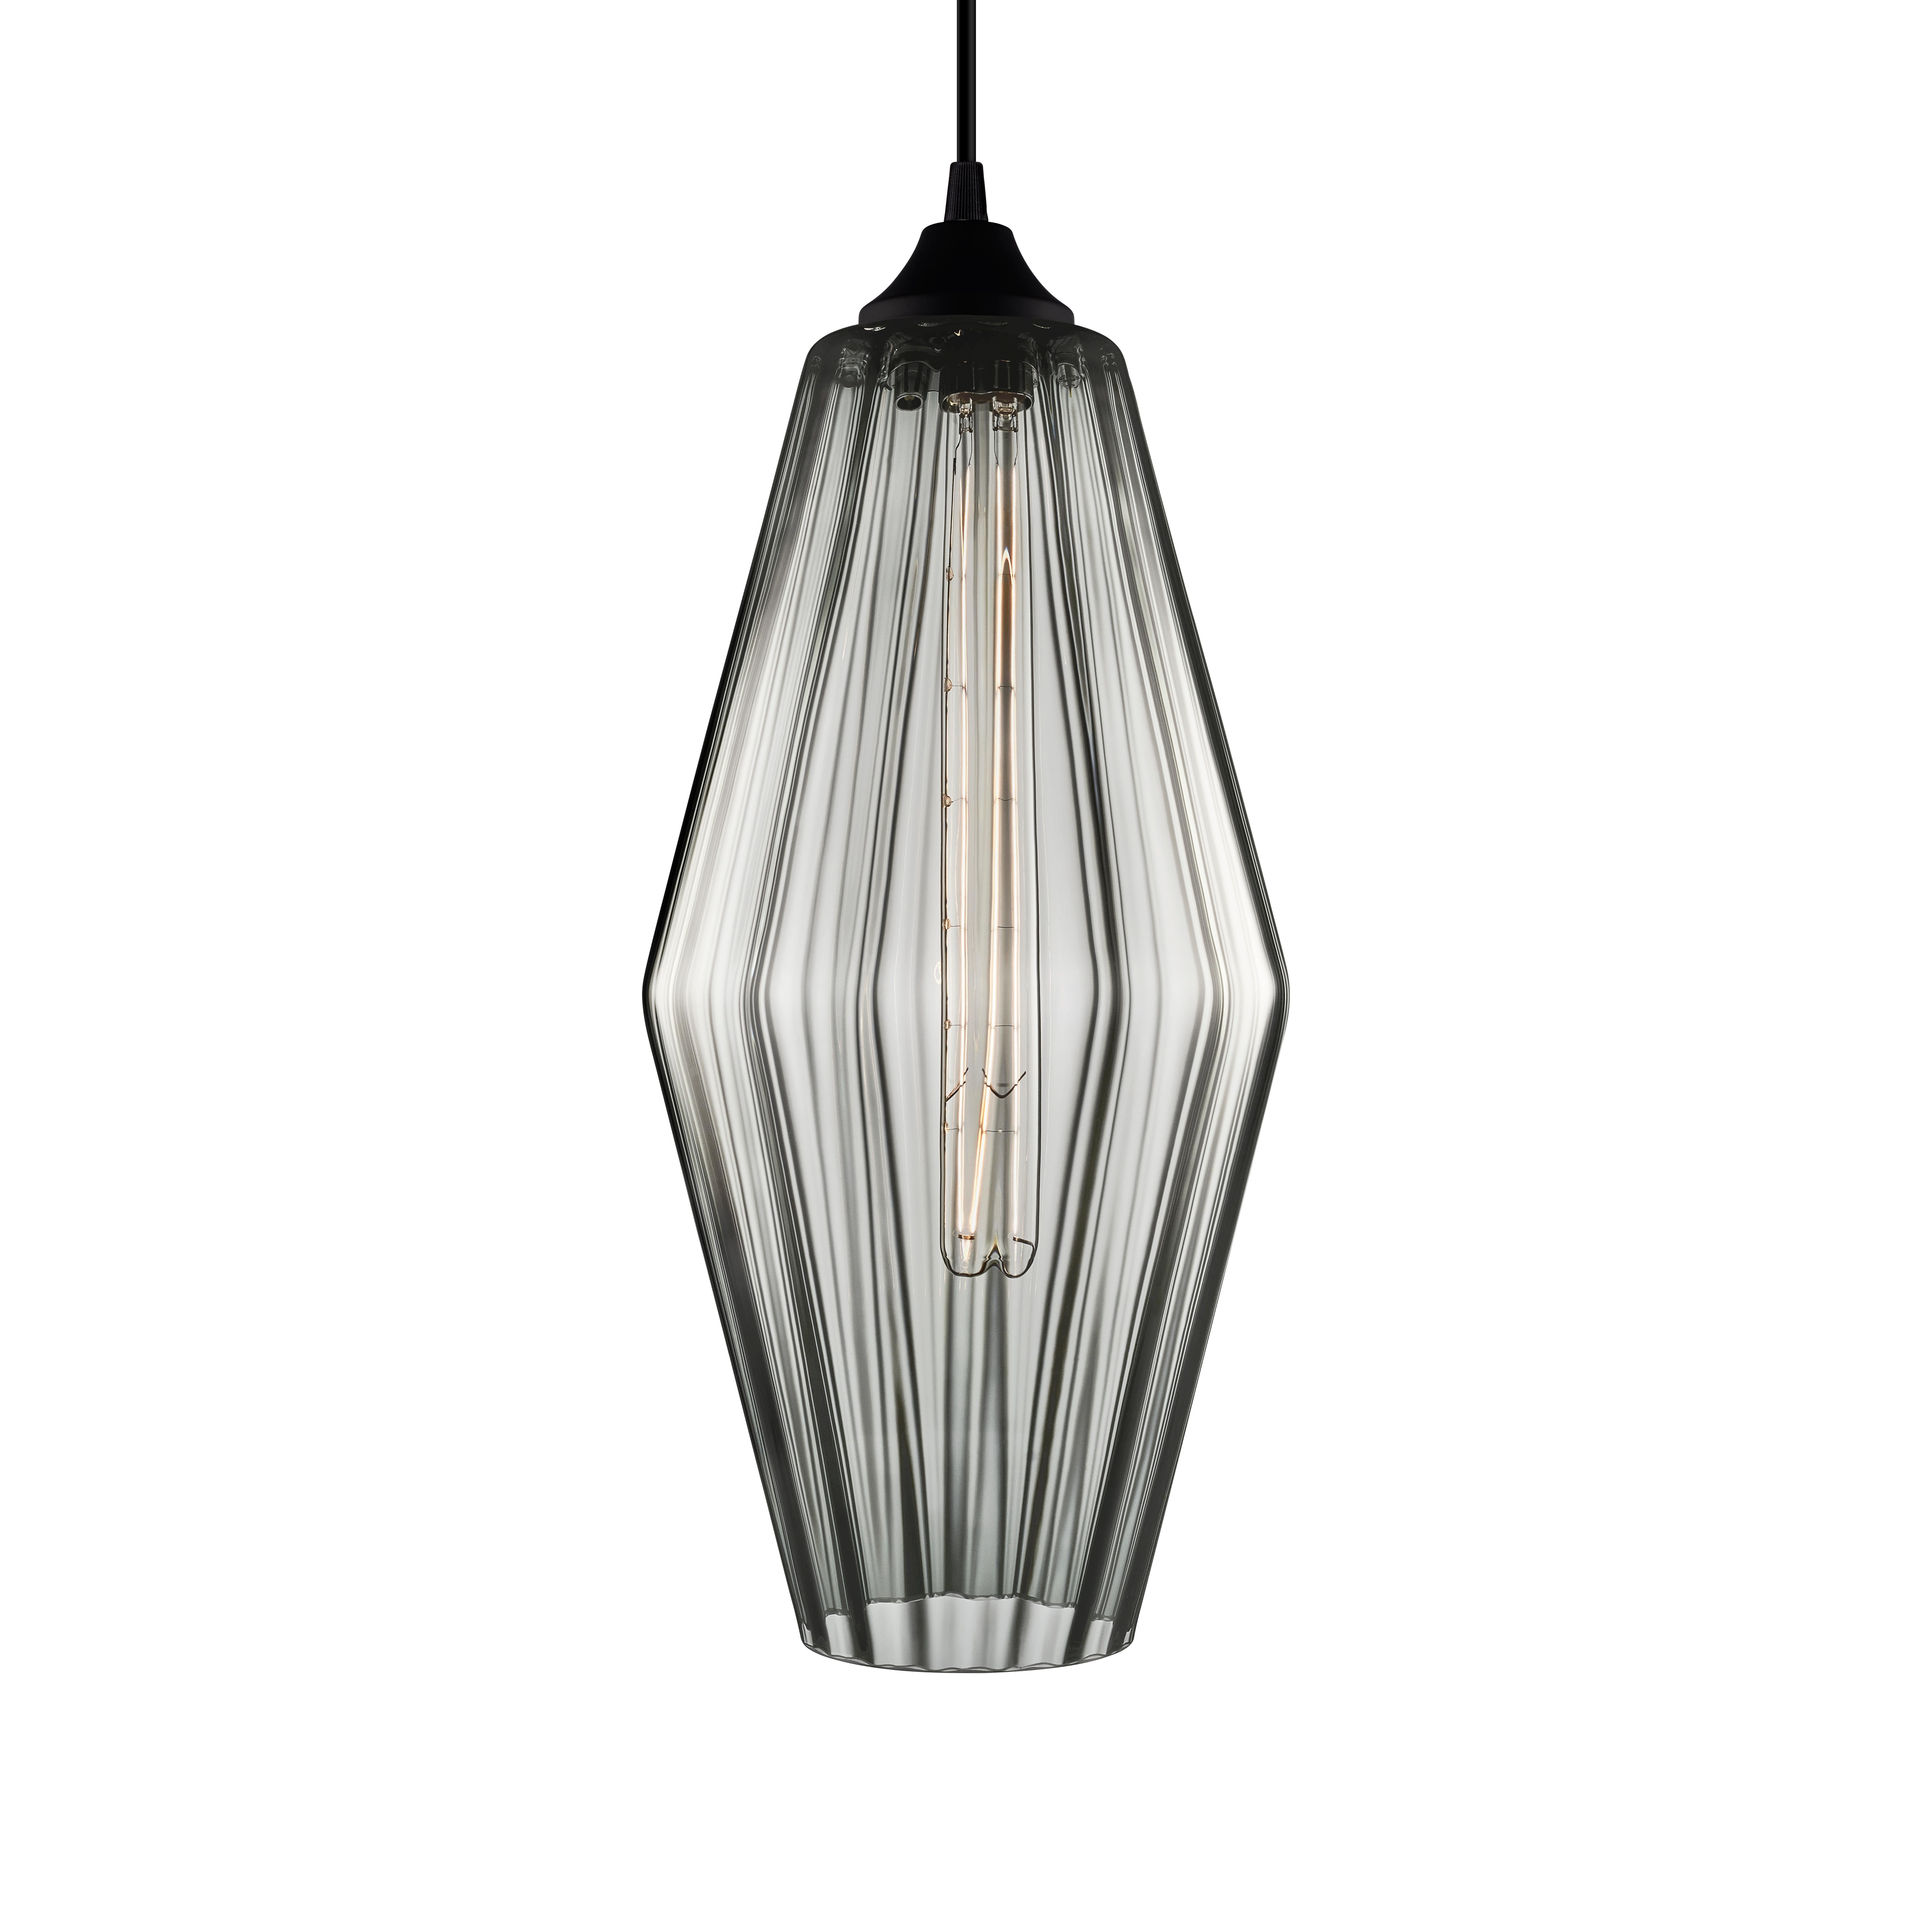 Marquise Grand Crystal Optique Handblown Modern Glass Pendant Light, Made in USA In New Condition For Sale In Beacon, NY